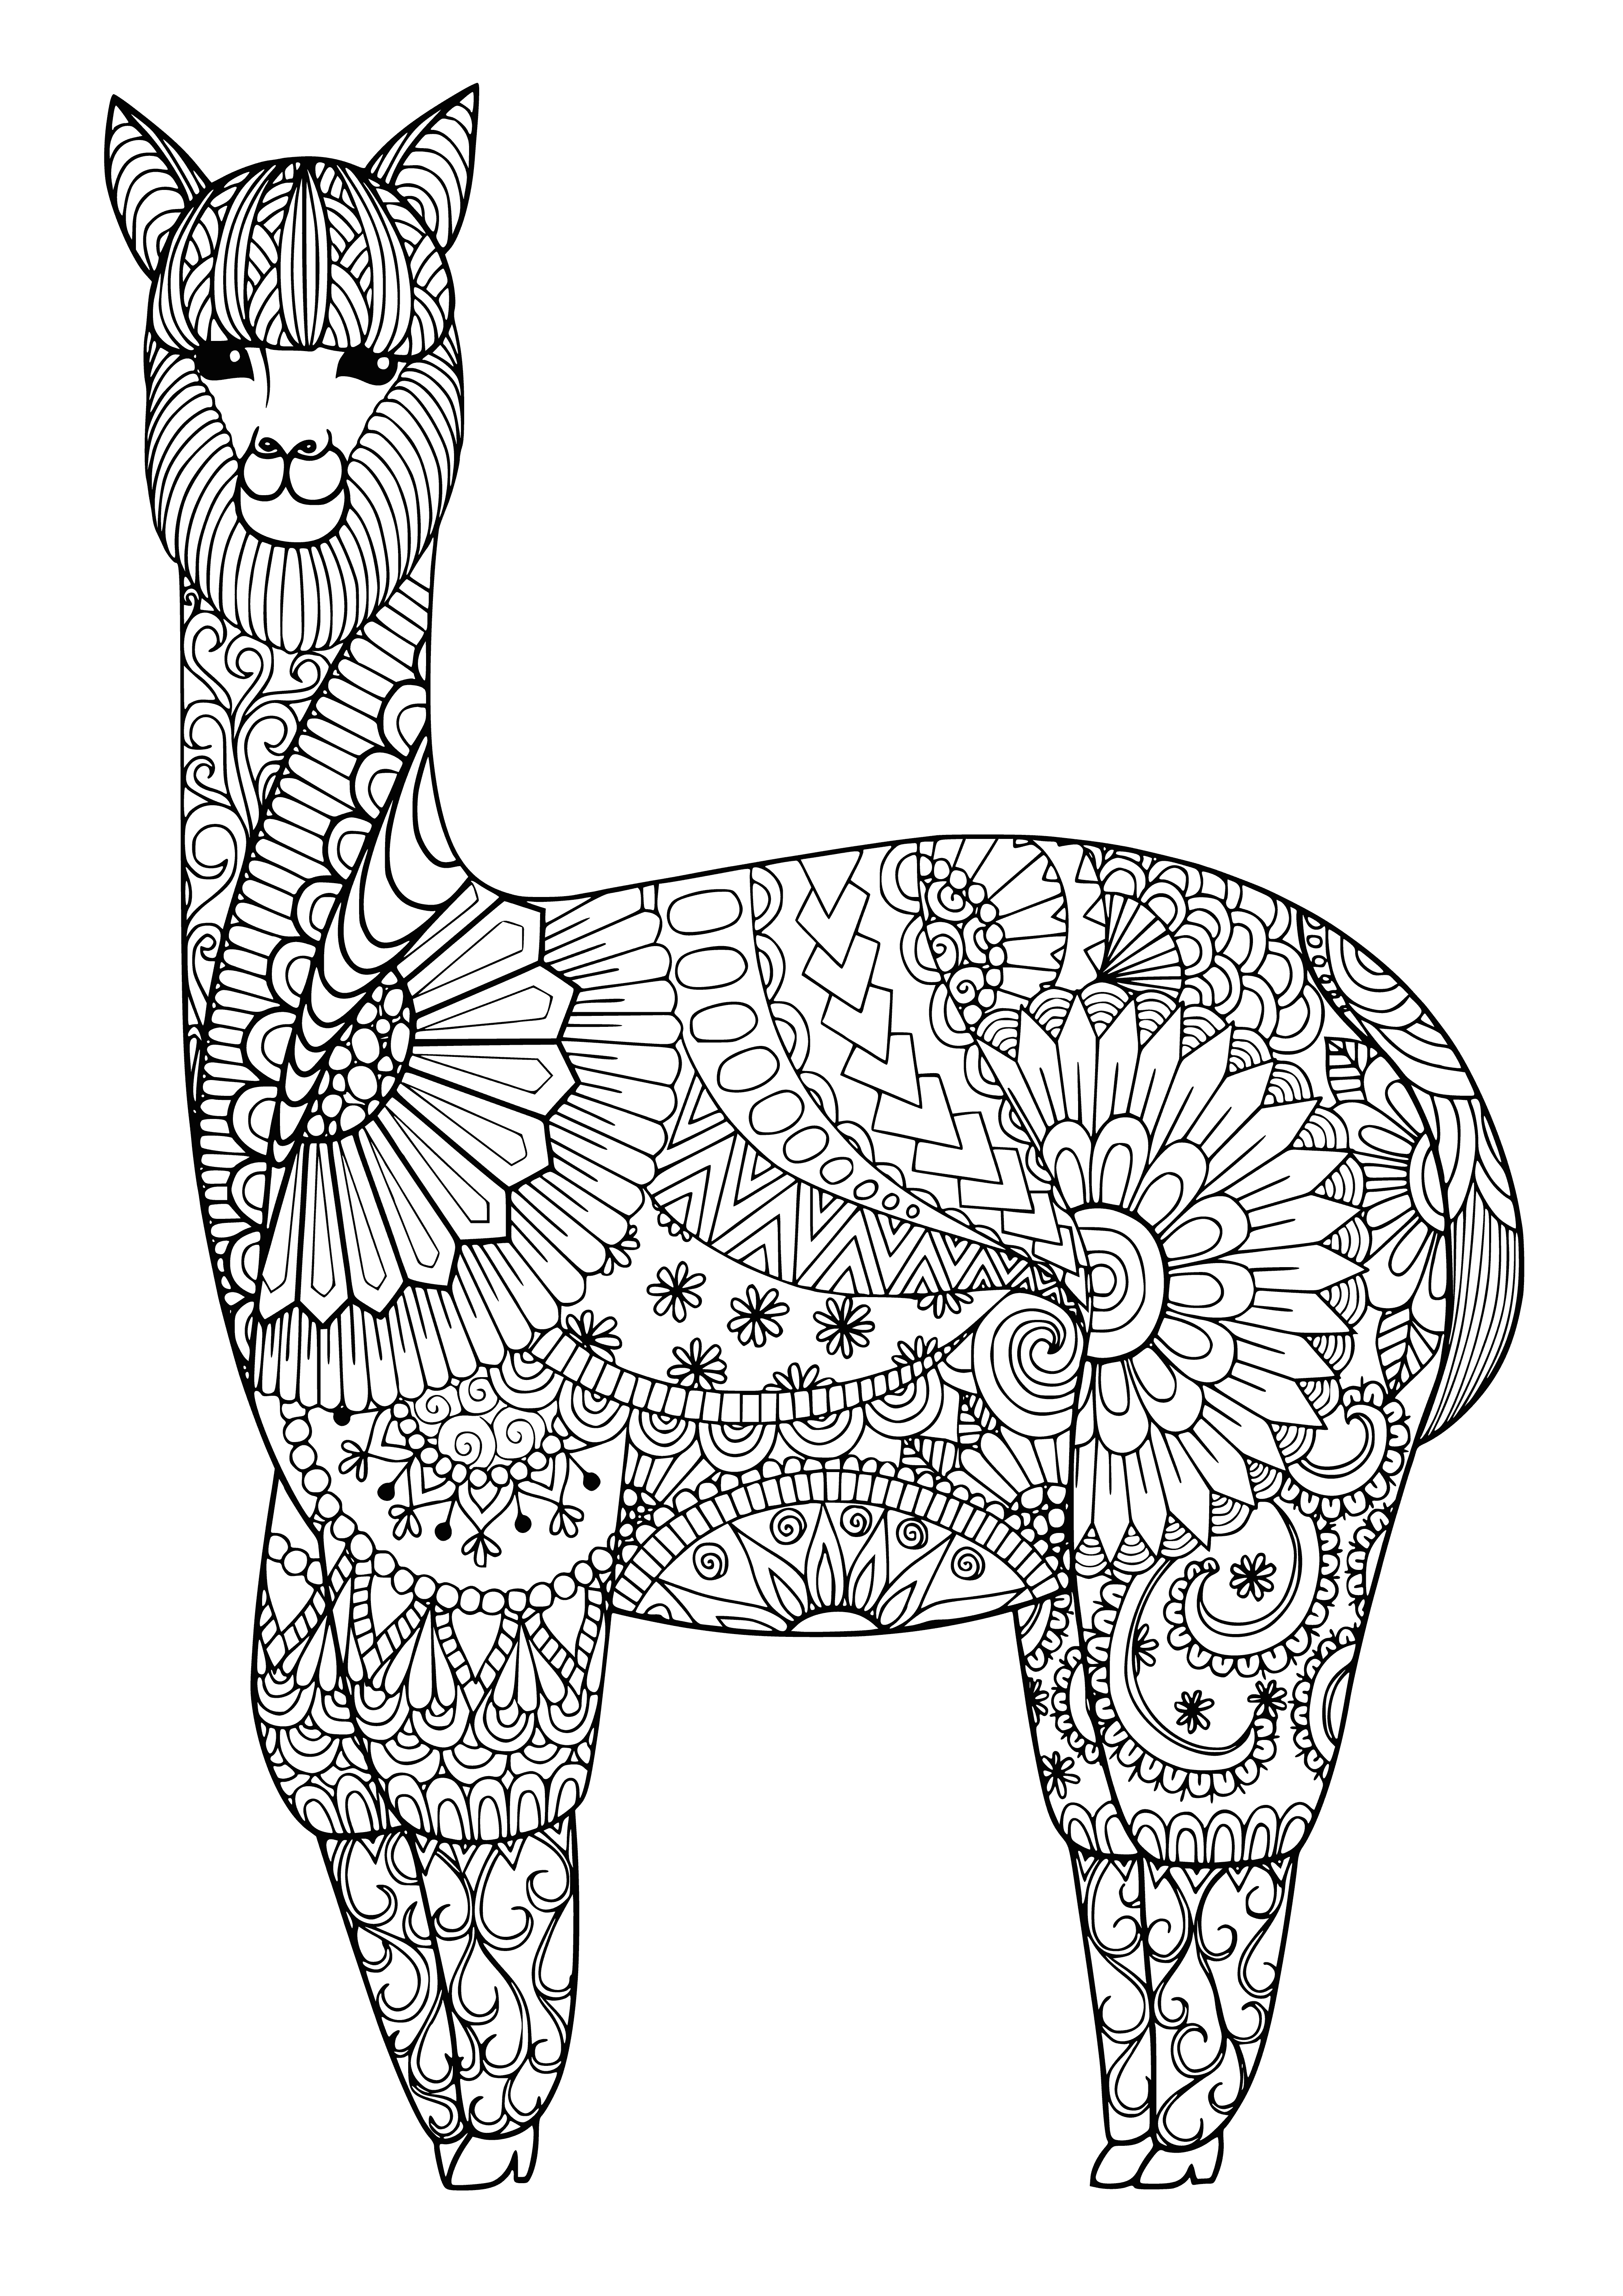 coloring page: Coloring pages of a peaceful llama in a scenic landscape, perfect for de-stressing. #AdultColoring